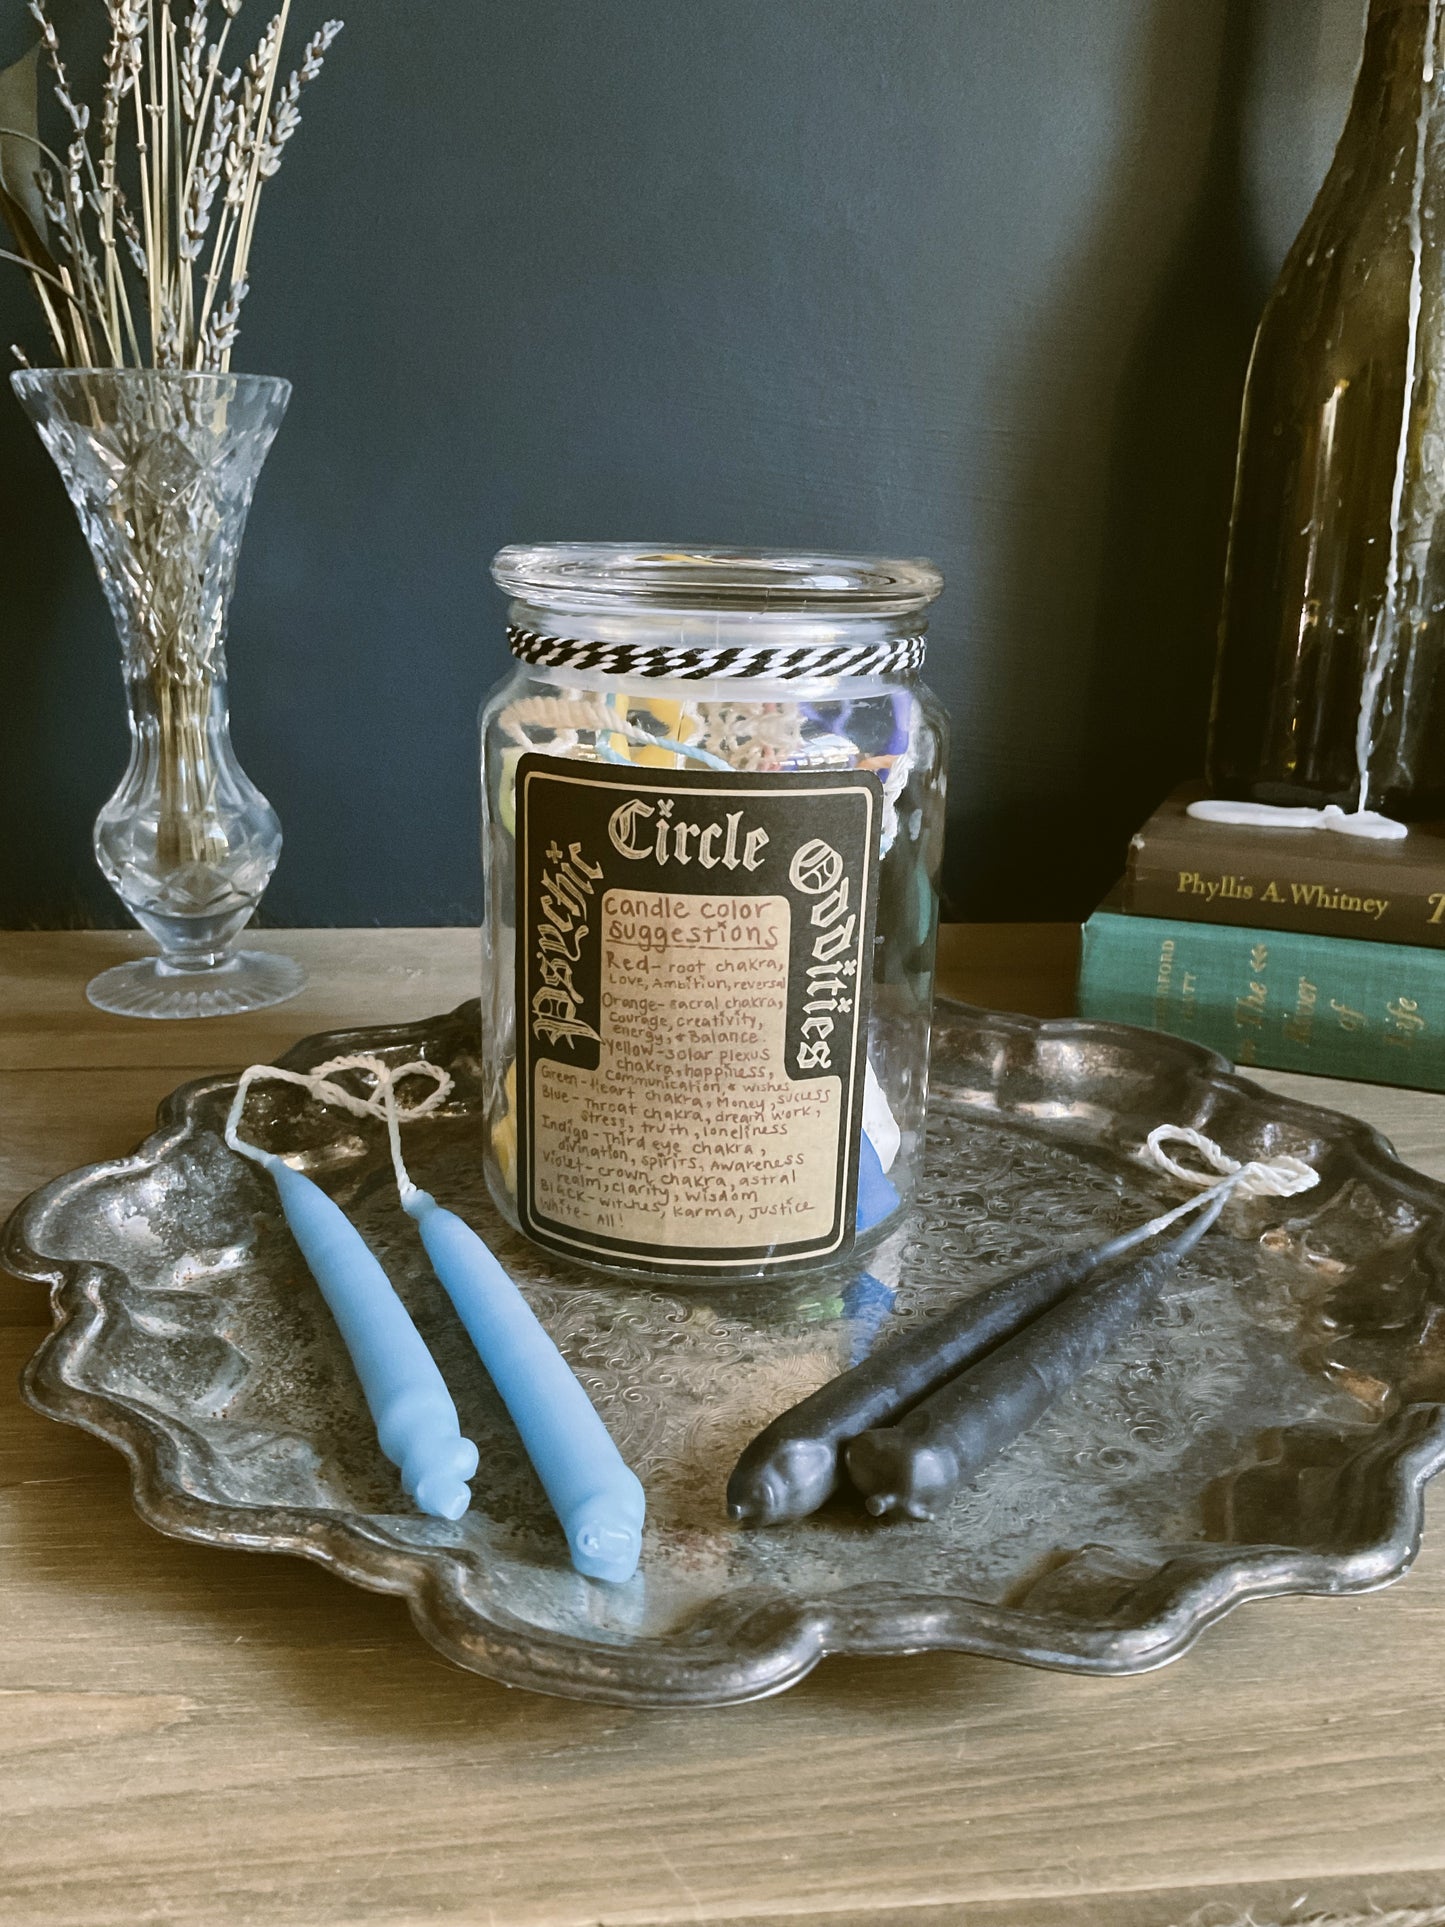 18 Hand-dipped Beeswax Spell Candles